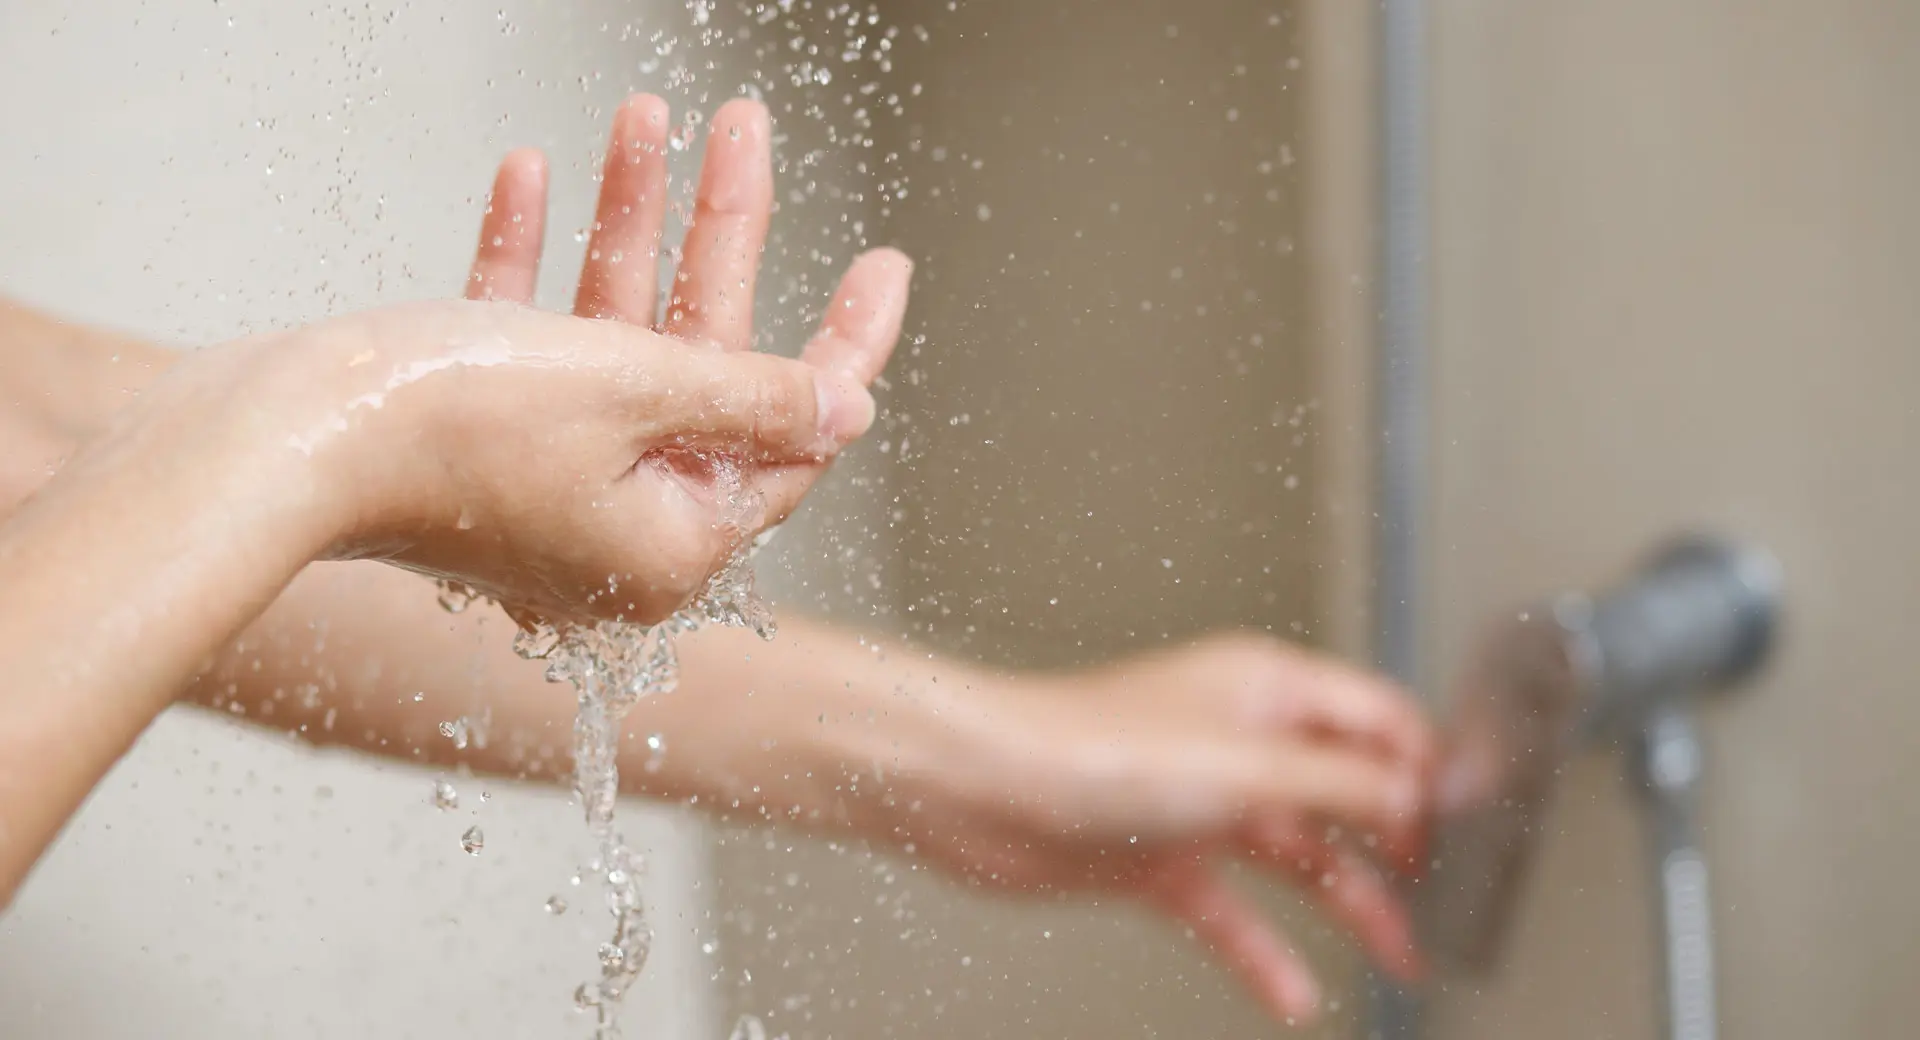 A person washing their hands with water